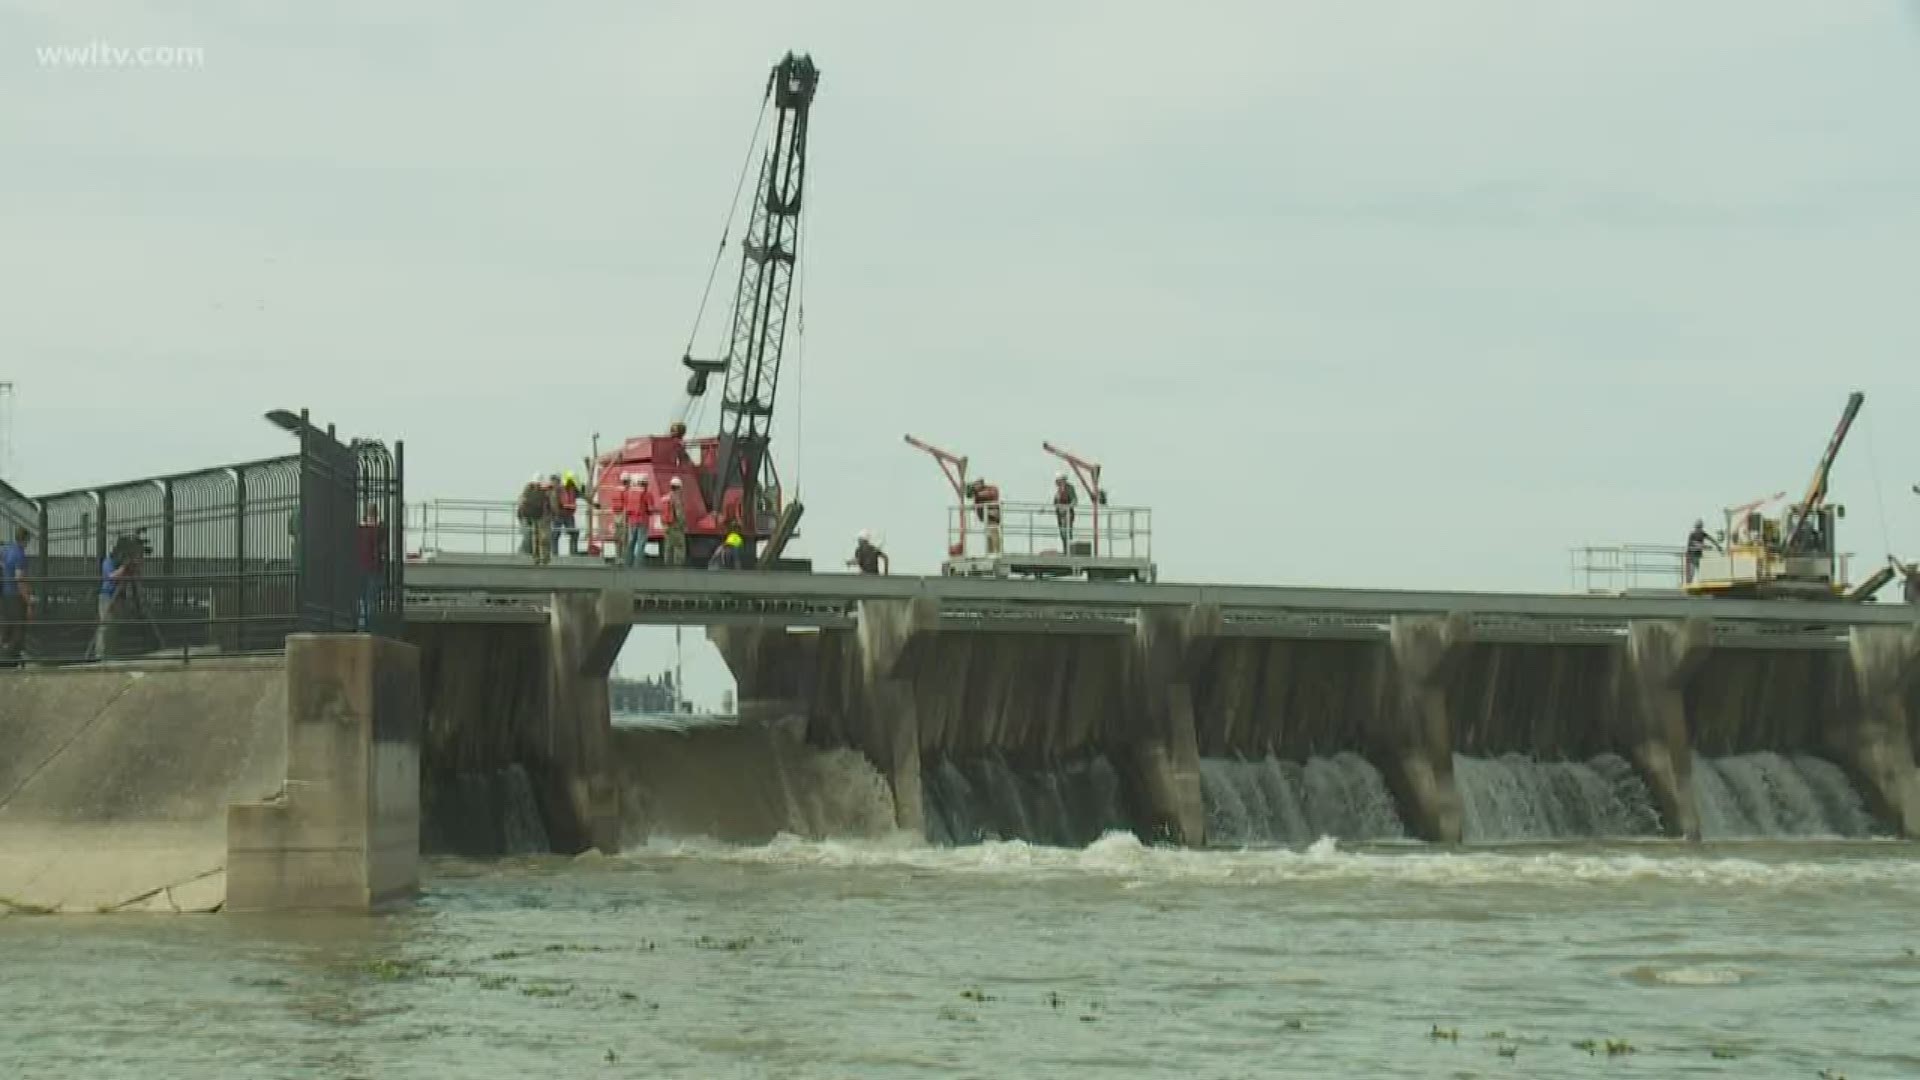 The U.S. Army Corps of Engineers opened 20 bays of the Bonnet Carré Spillway Friday after the Mississippi River was forecast to rise to flood stage at New Orleans ne